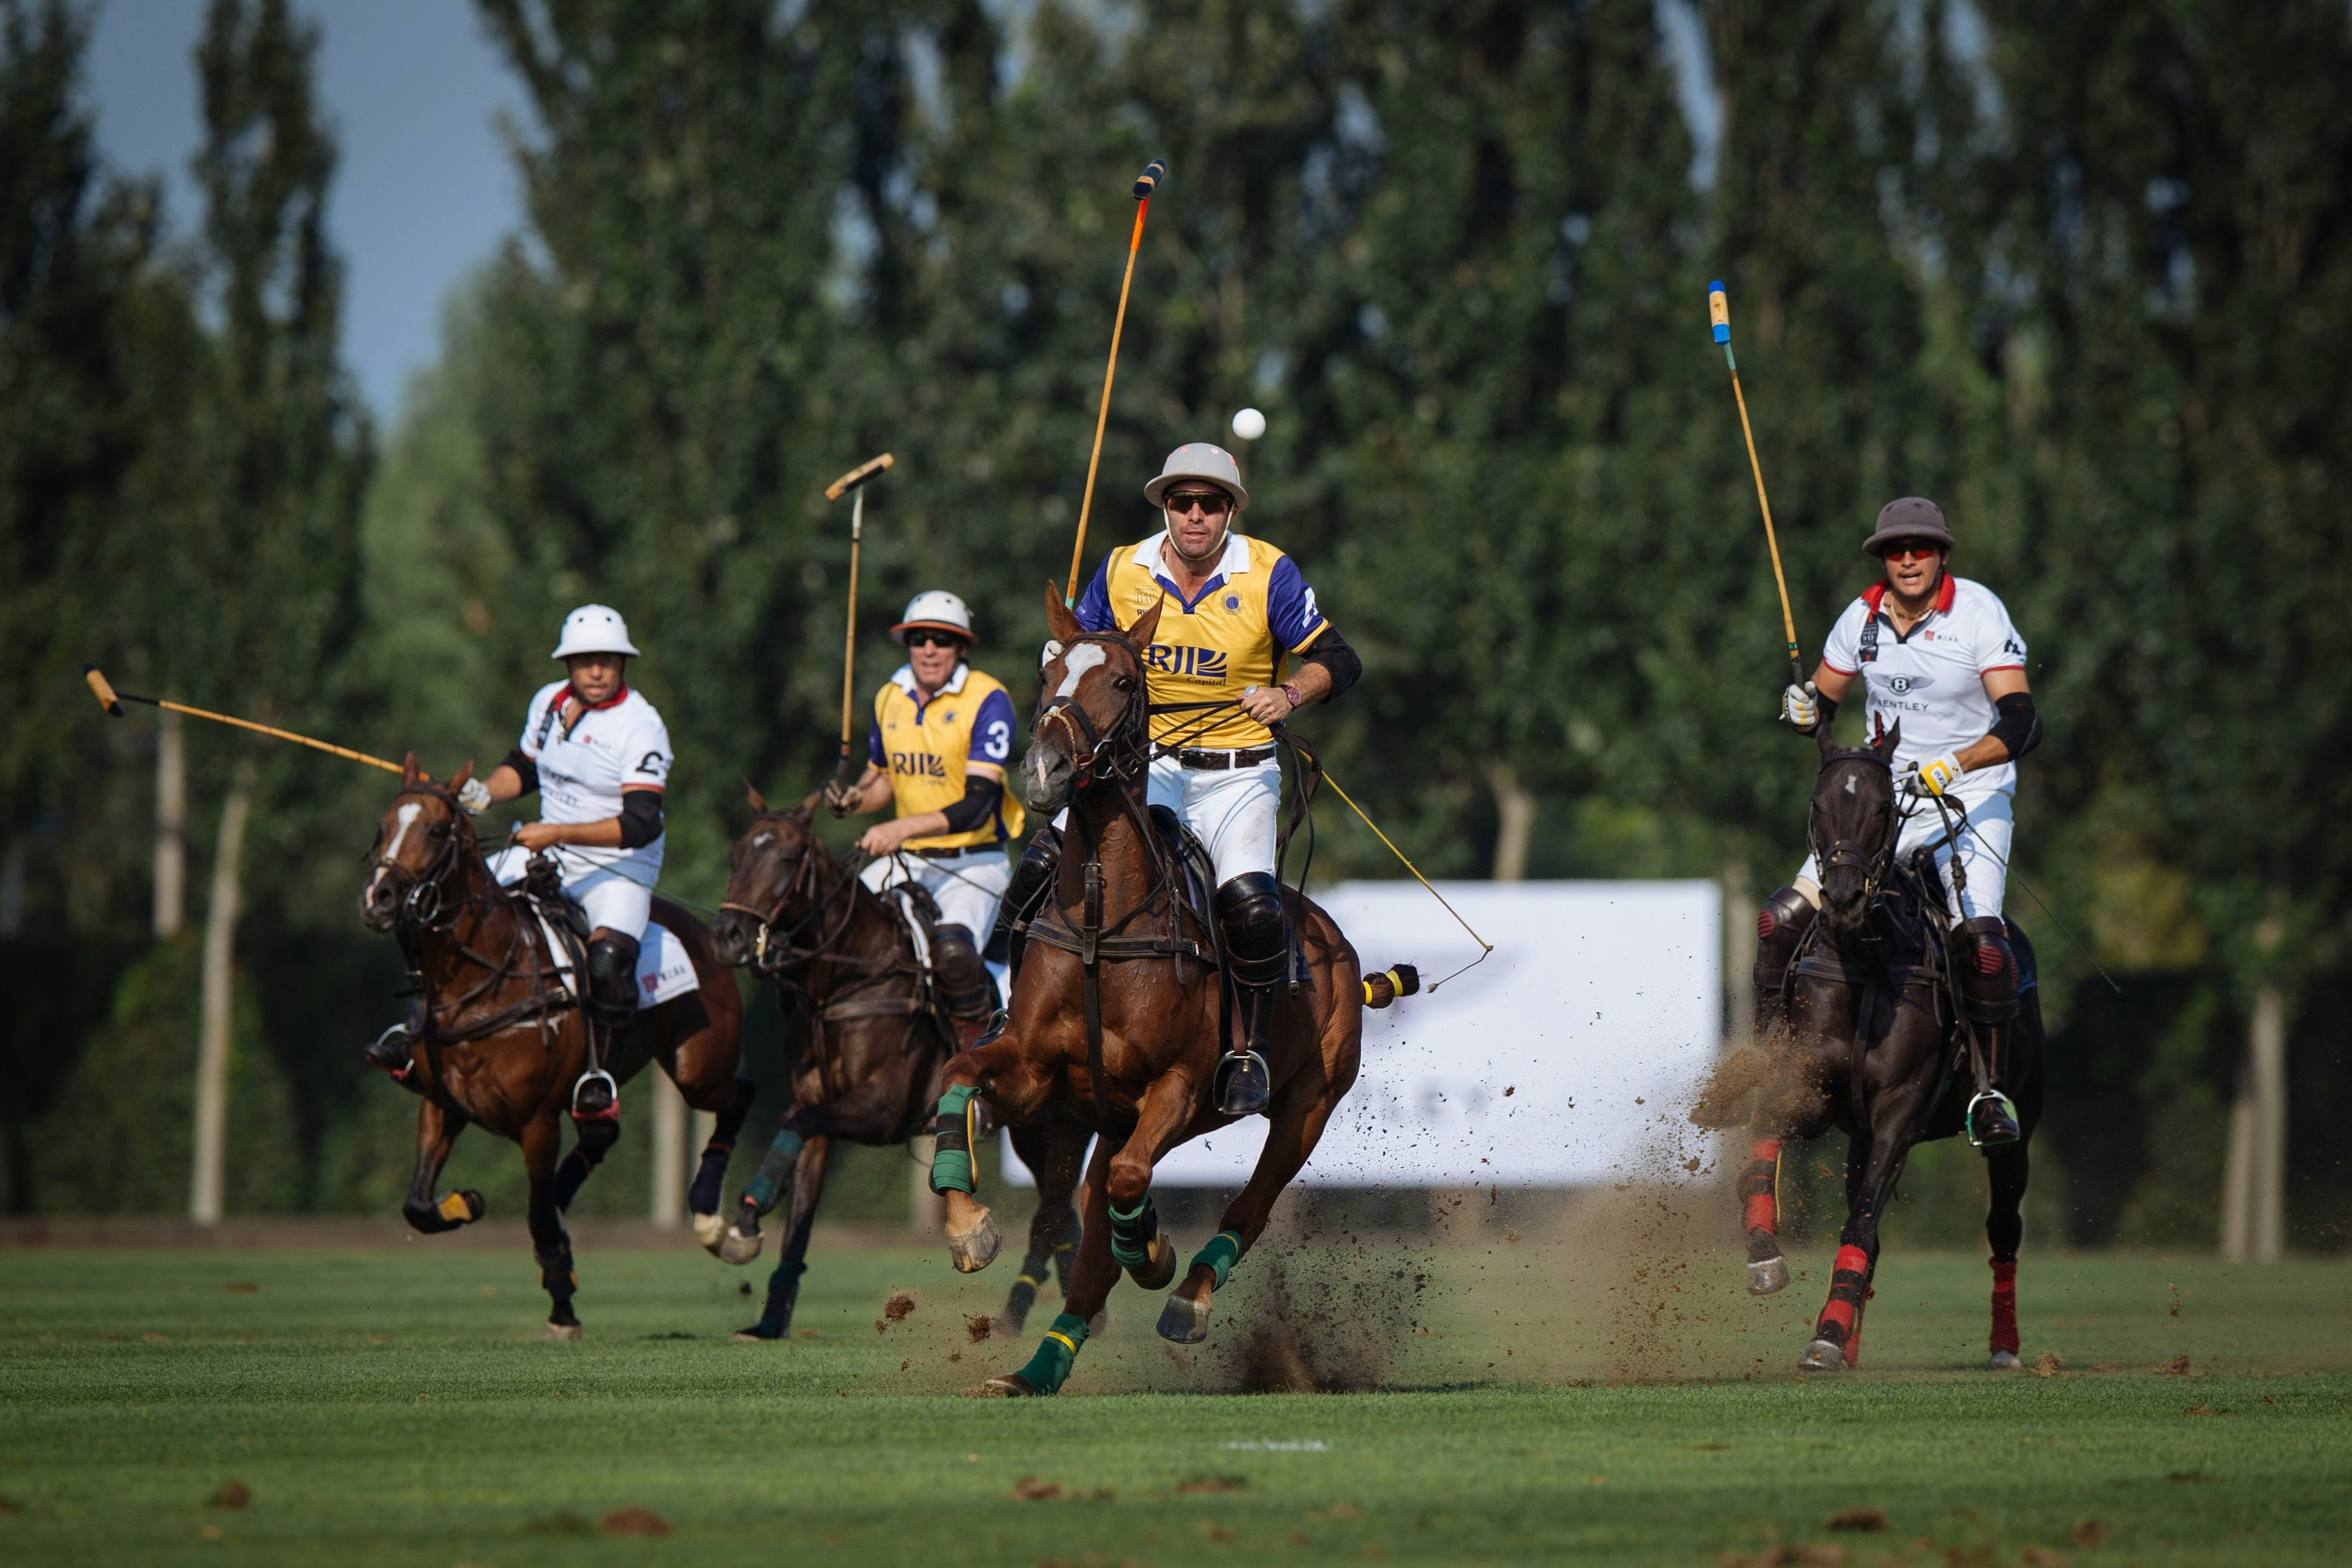 The RJI Capital Commonwealth ream competes with the Bentley Tang Polo Club team at British Polo Day 2016 in Beijing. (Sam Churchill)